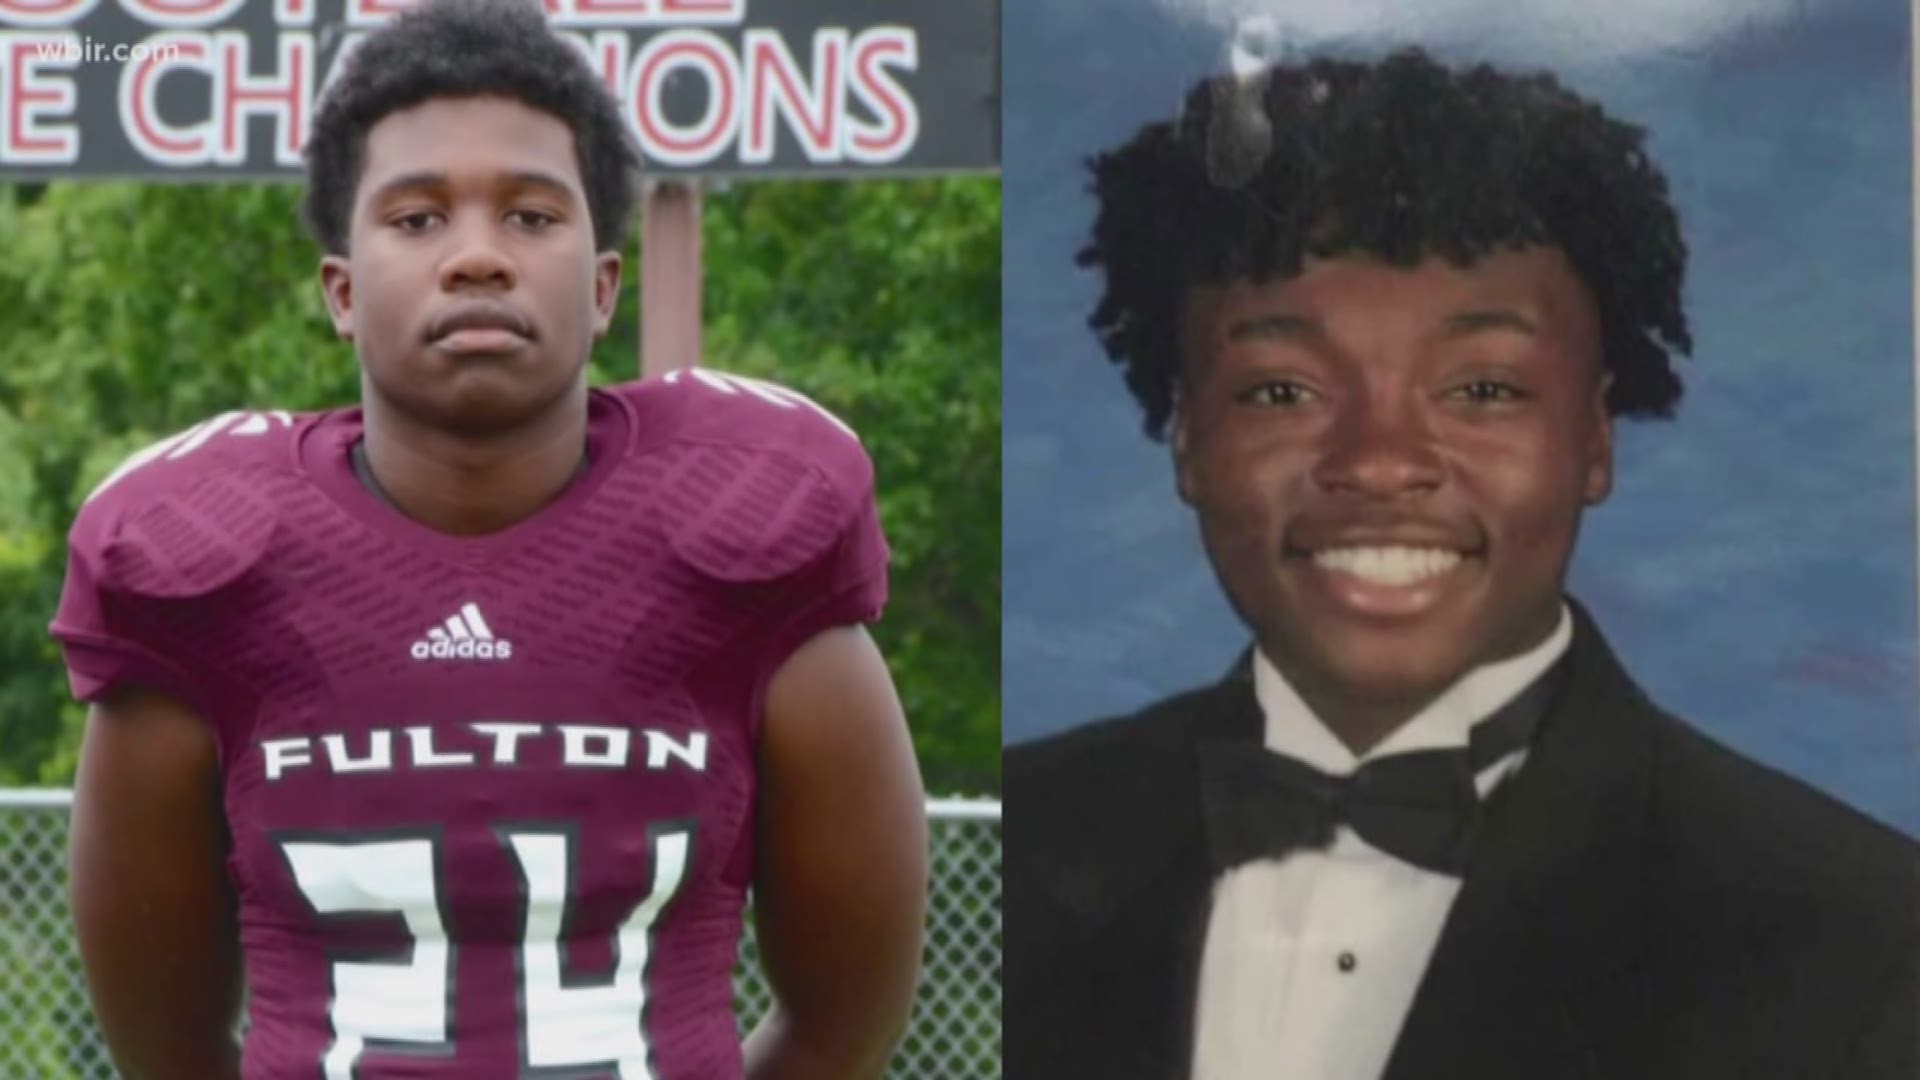 April 25, 2018: The shooting death of Mekhi Luster marks the second member of the Fulton High School senior class killed by gunfire. Two years ago, Zaevion Dobson died shilding friends from a random spray of bullets.